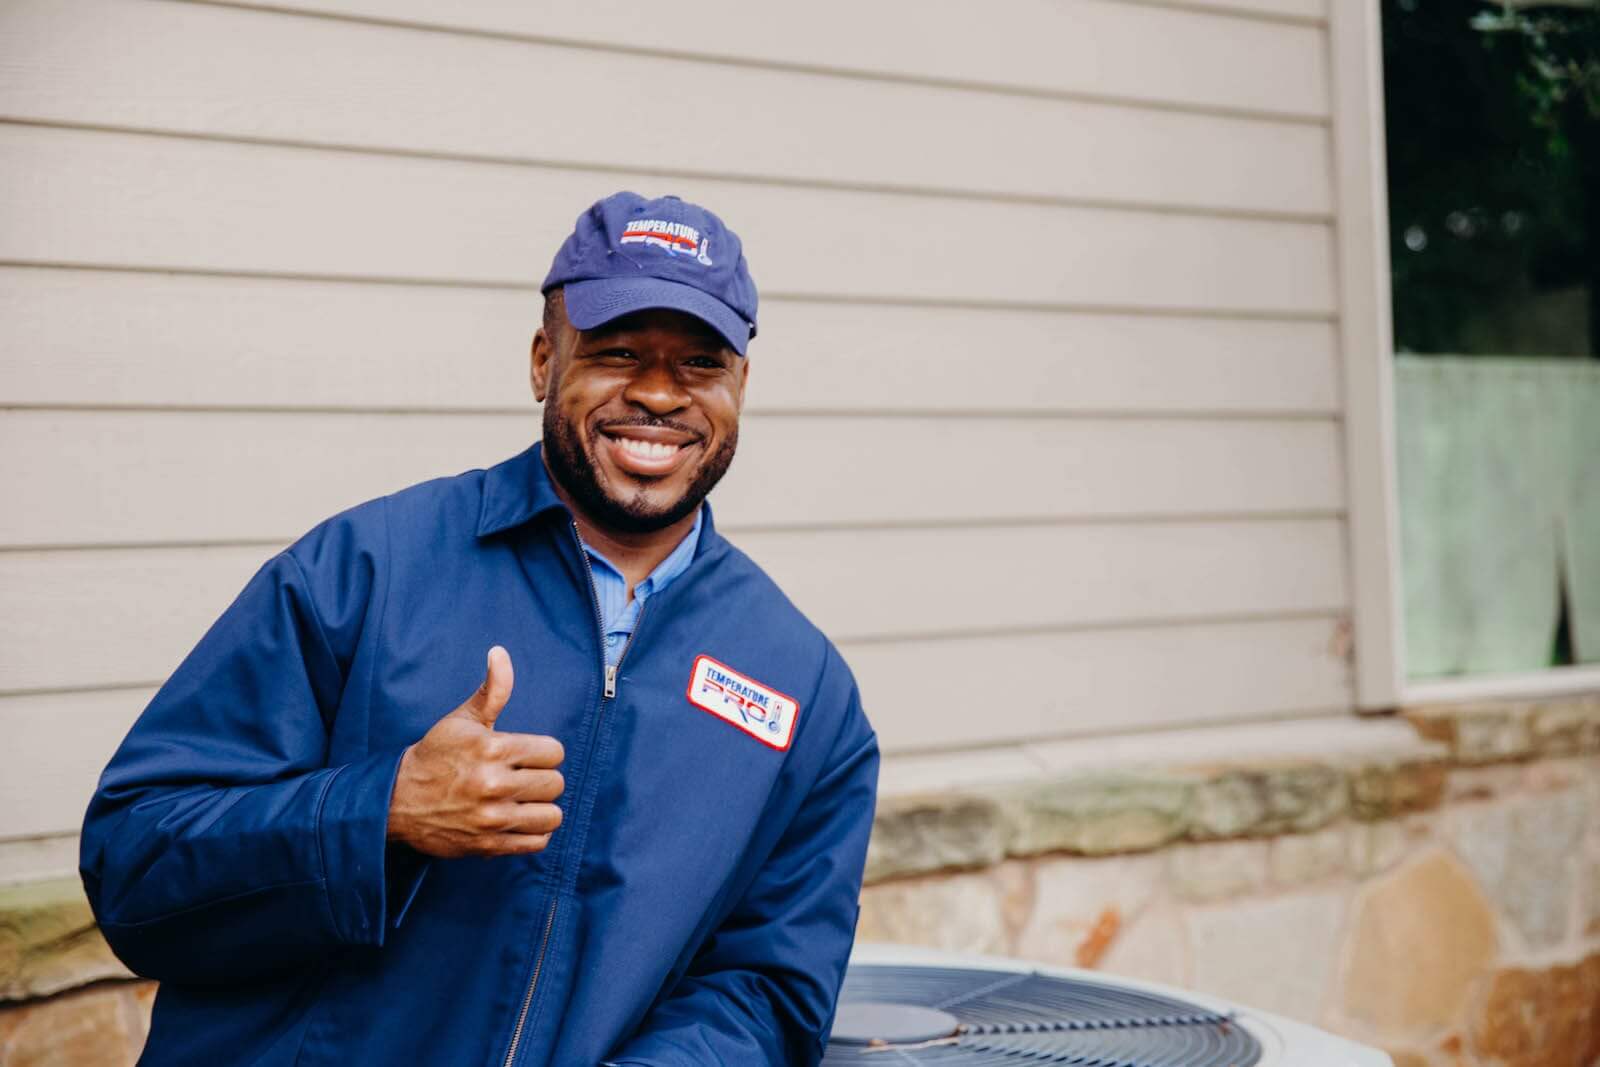 hvac technician with thumbs up